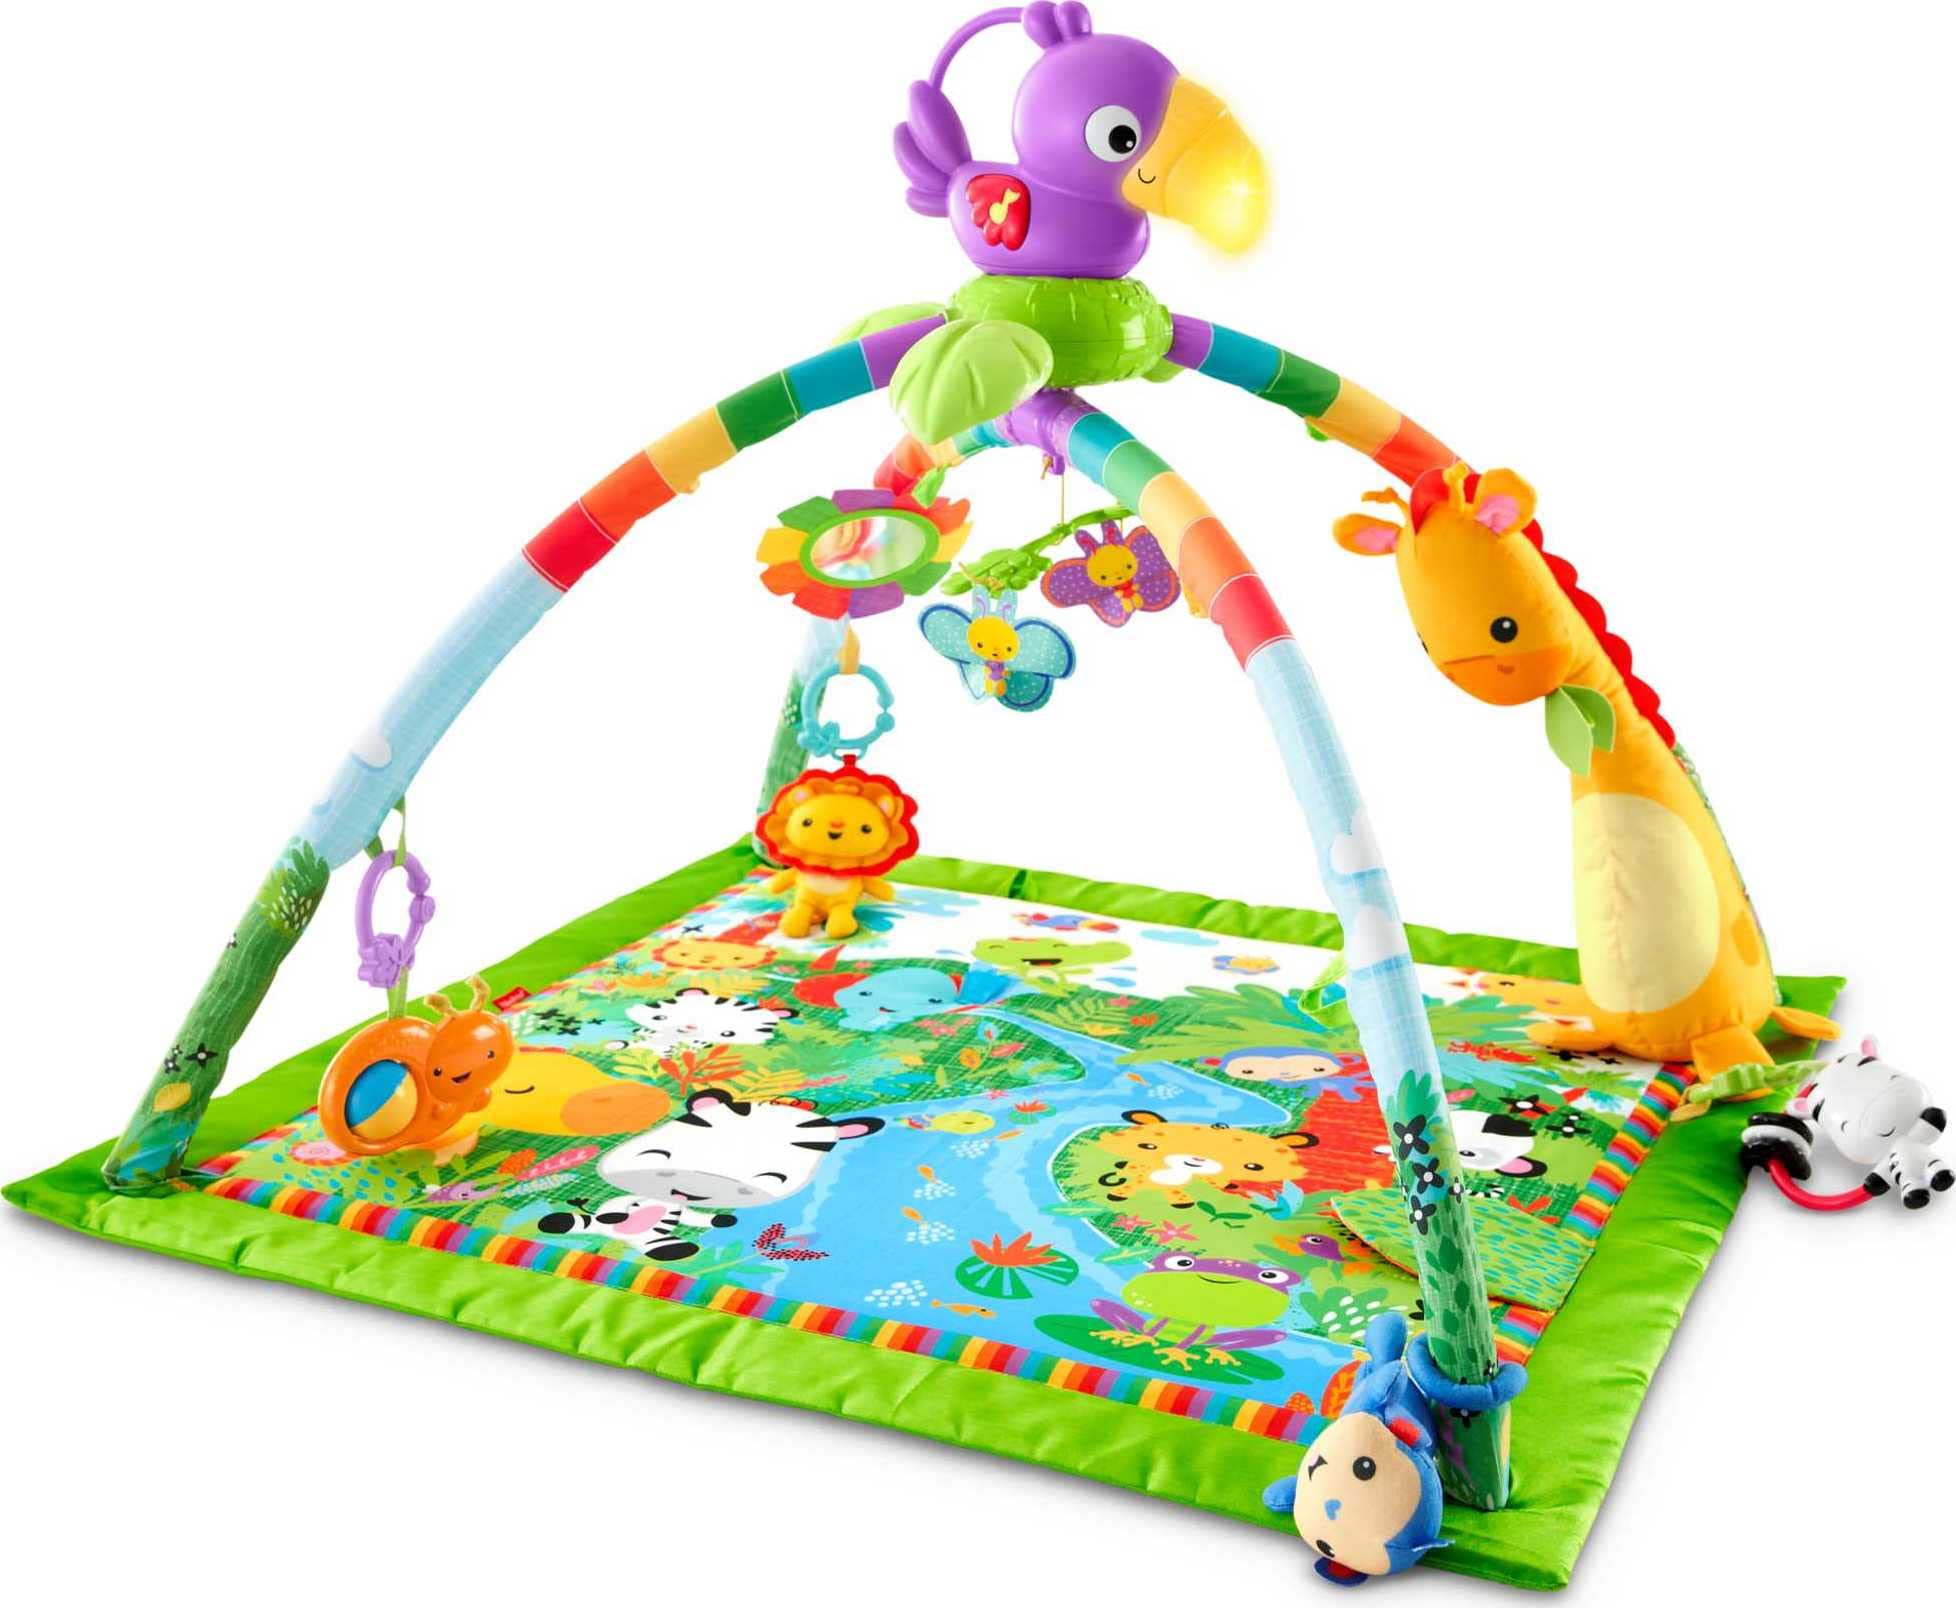 Fisher Price Playmat Rainforest Music & Lights Deluxe Gym with 10+ Toys & Activites for Newborn Tummy Time Play (Amazon Exclusive)